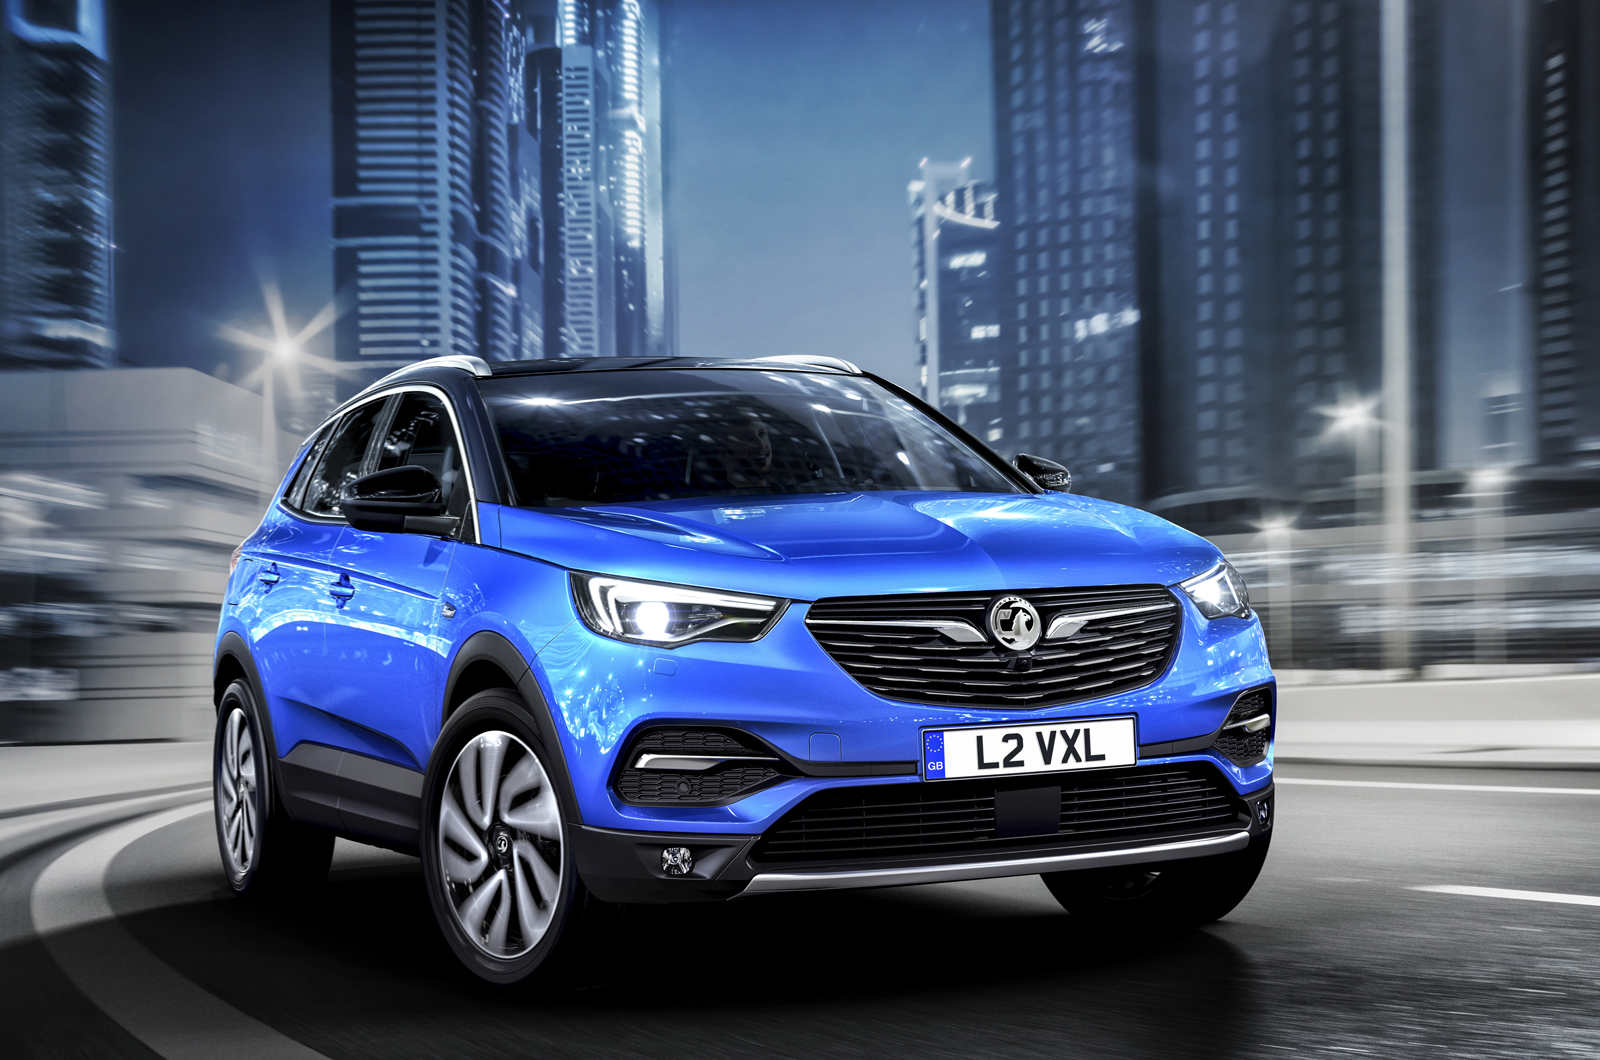 Vauxhall Grandland X - Seat Ateca rival on sale, priced from £22,310